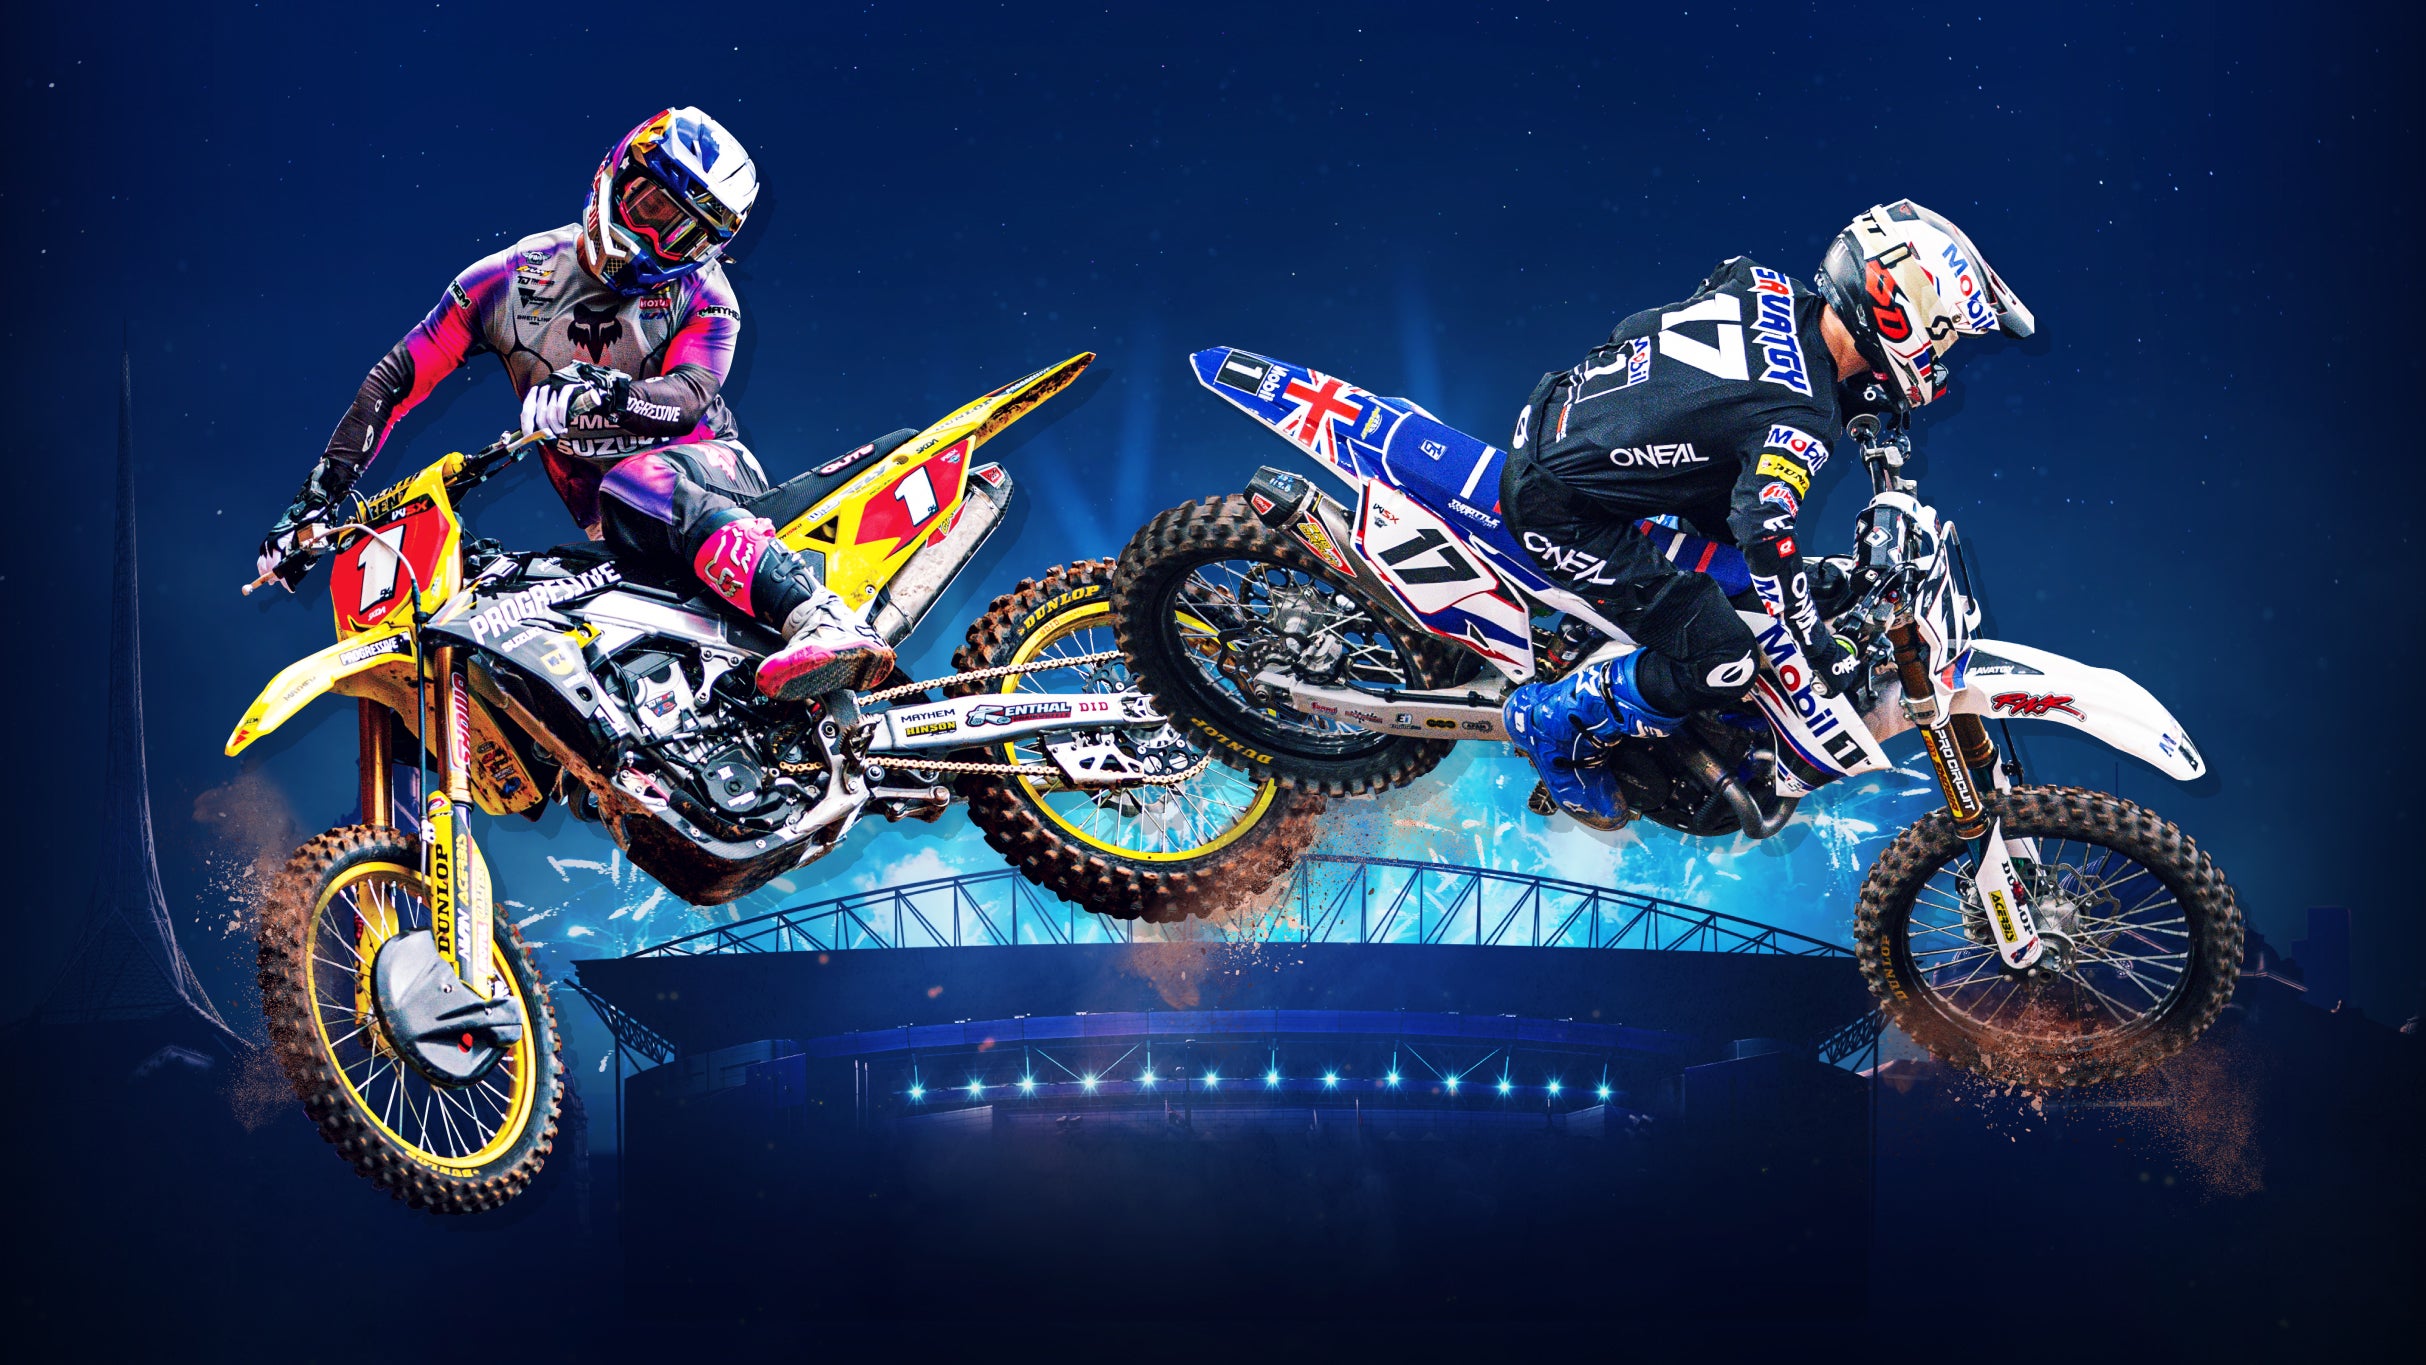 FIM WSX World Supercross Australian Grand Prix - 2 Day Pass in Docklands promo photo for Exclusive presale offer code